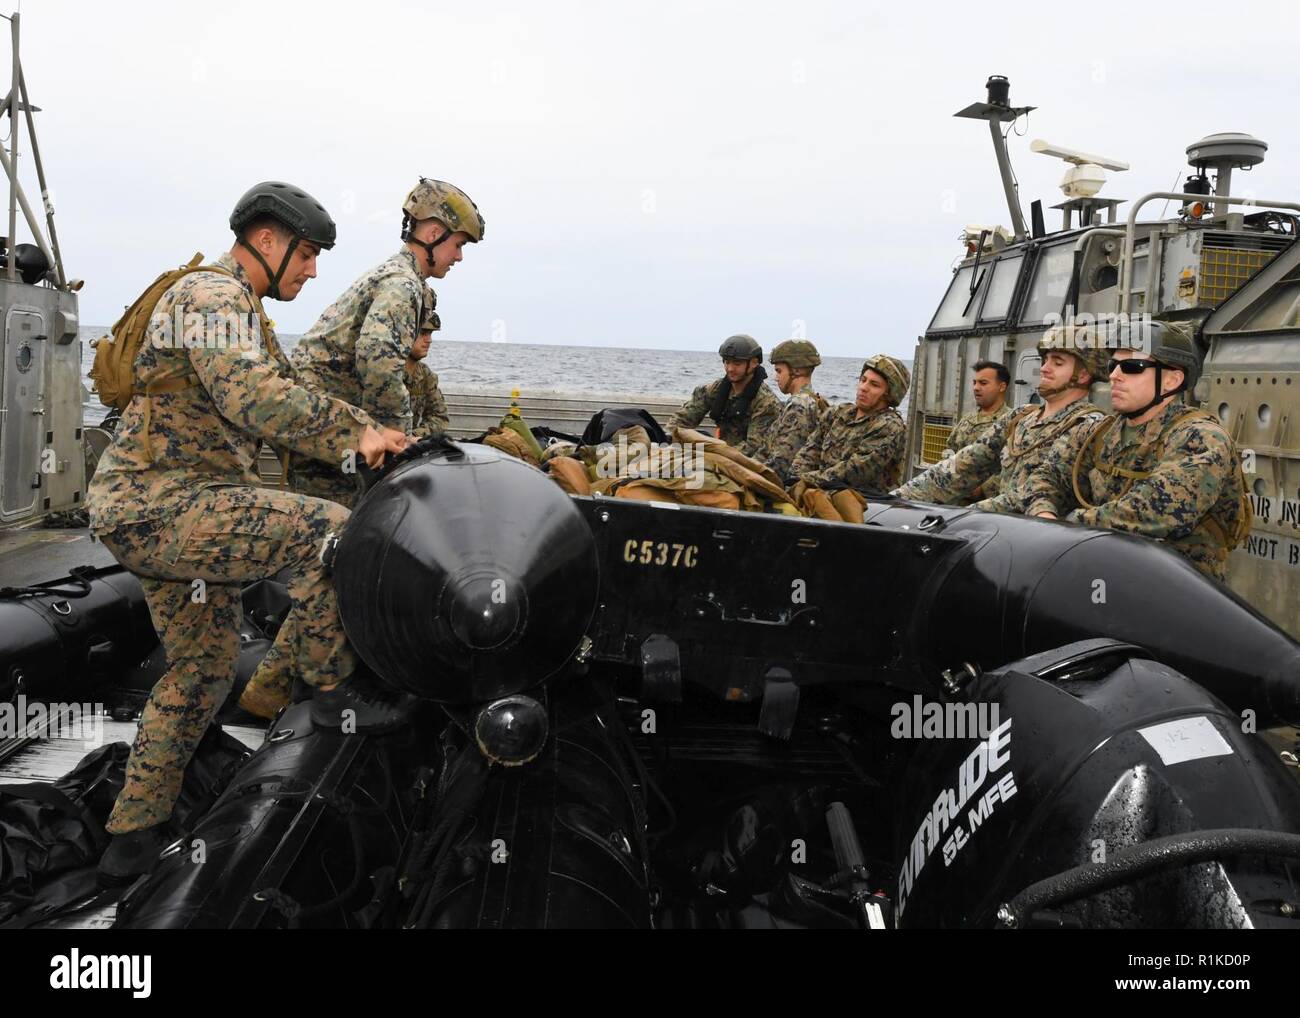 EAST CHINA SEA (Oct. 14, 2018) Marines, assigned to the 31st Marine Expeditionary Unit (MEU), prepare to launch a combat raiding rubber craft aboard a landing craft, air cushion, assigned to Naval Beach Unit 7,  during integrated unit level training. The amphibious assault ship USS Wasp (LHD 1), flagship of Wasp Amphibious Ready Group, with embarked 31st MEU, is operating in the Indo-Pacific region to enhance interoperability with partners and serve as a ready-response force for any type of contingency. Stock Photo